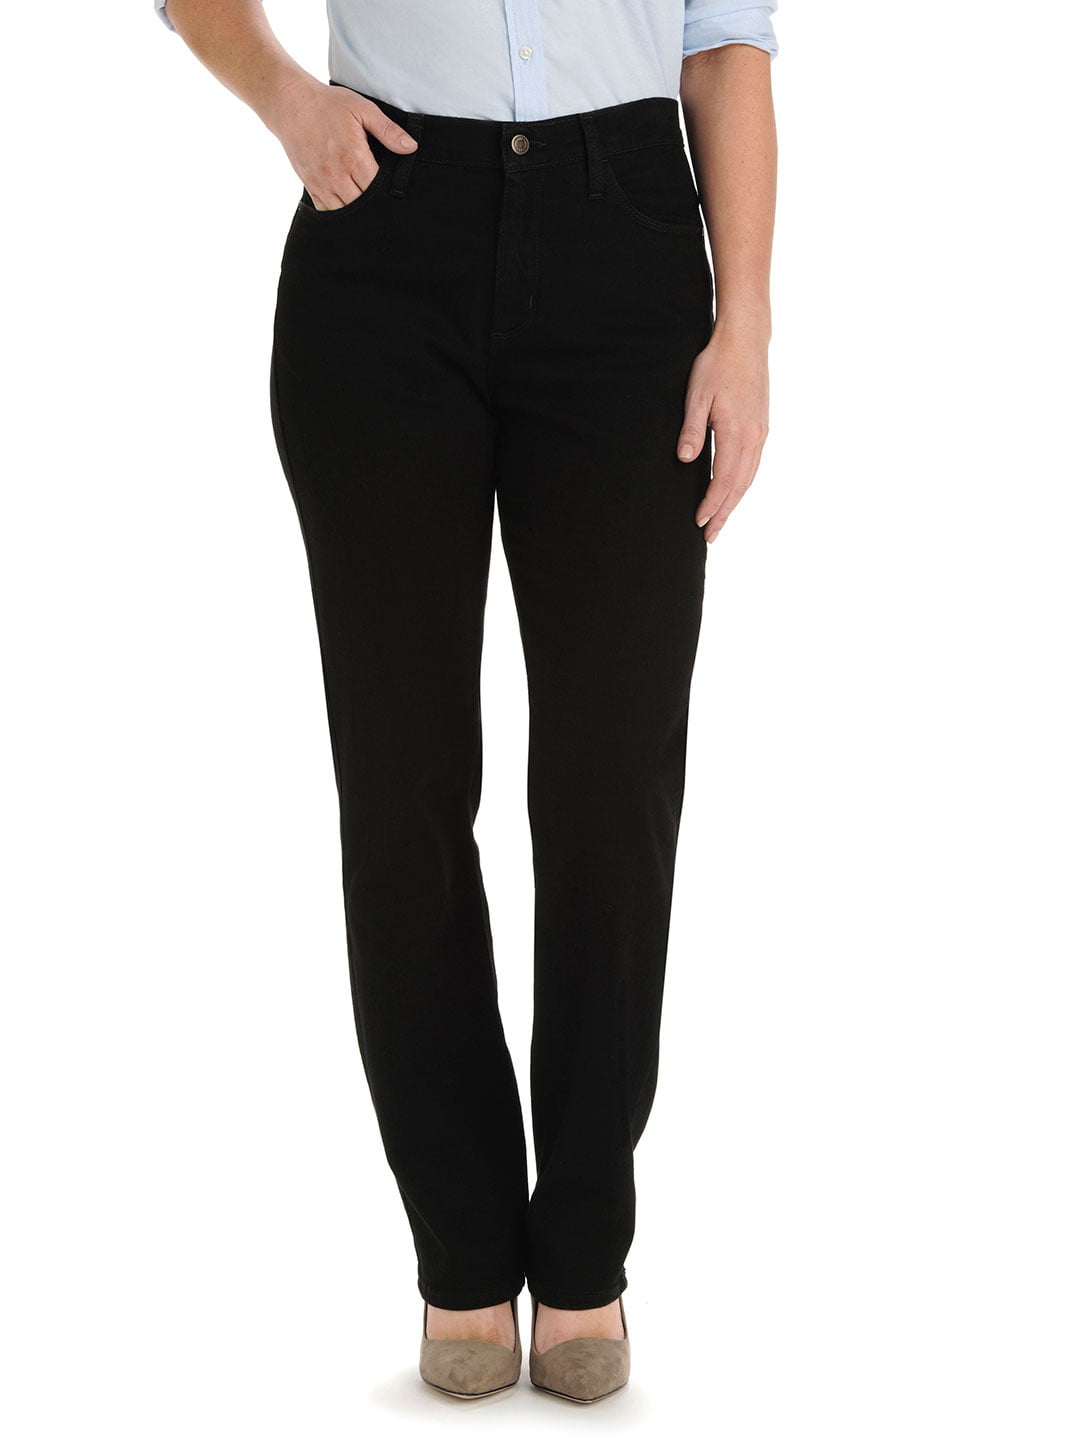 Lee - Lee Women's Stretch Relaxed Fit Straight Leg Jeans - Black ...